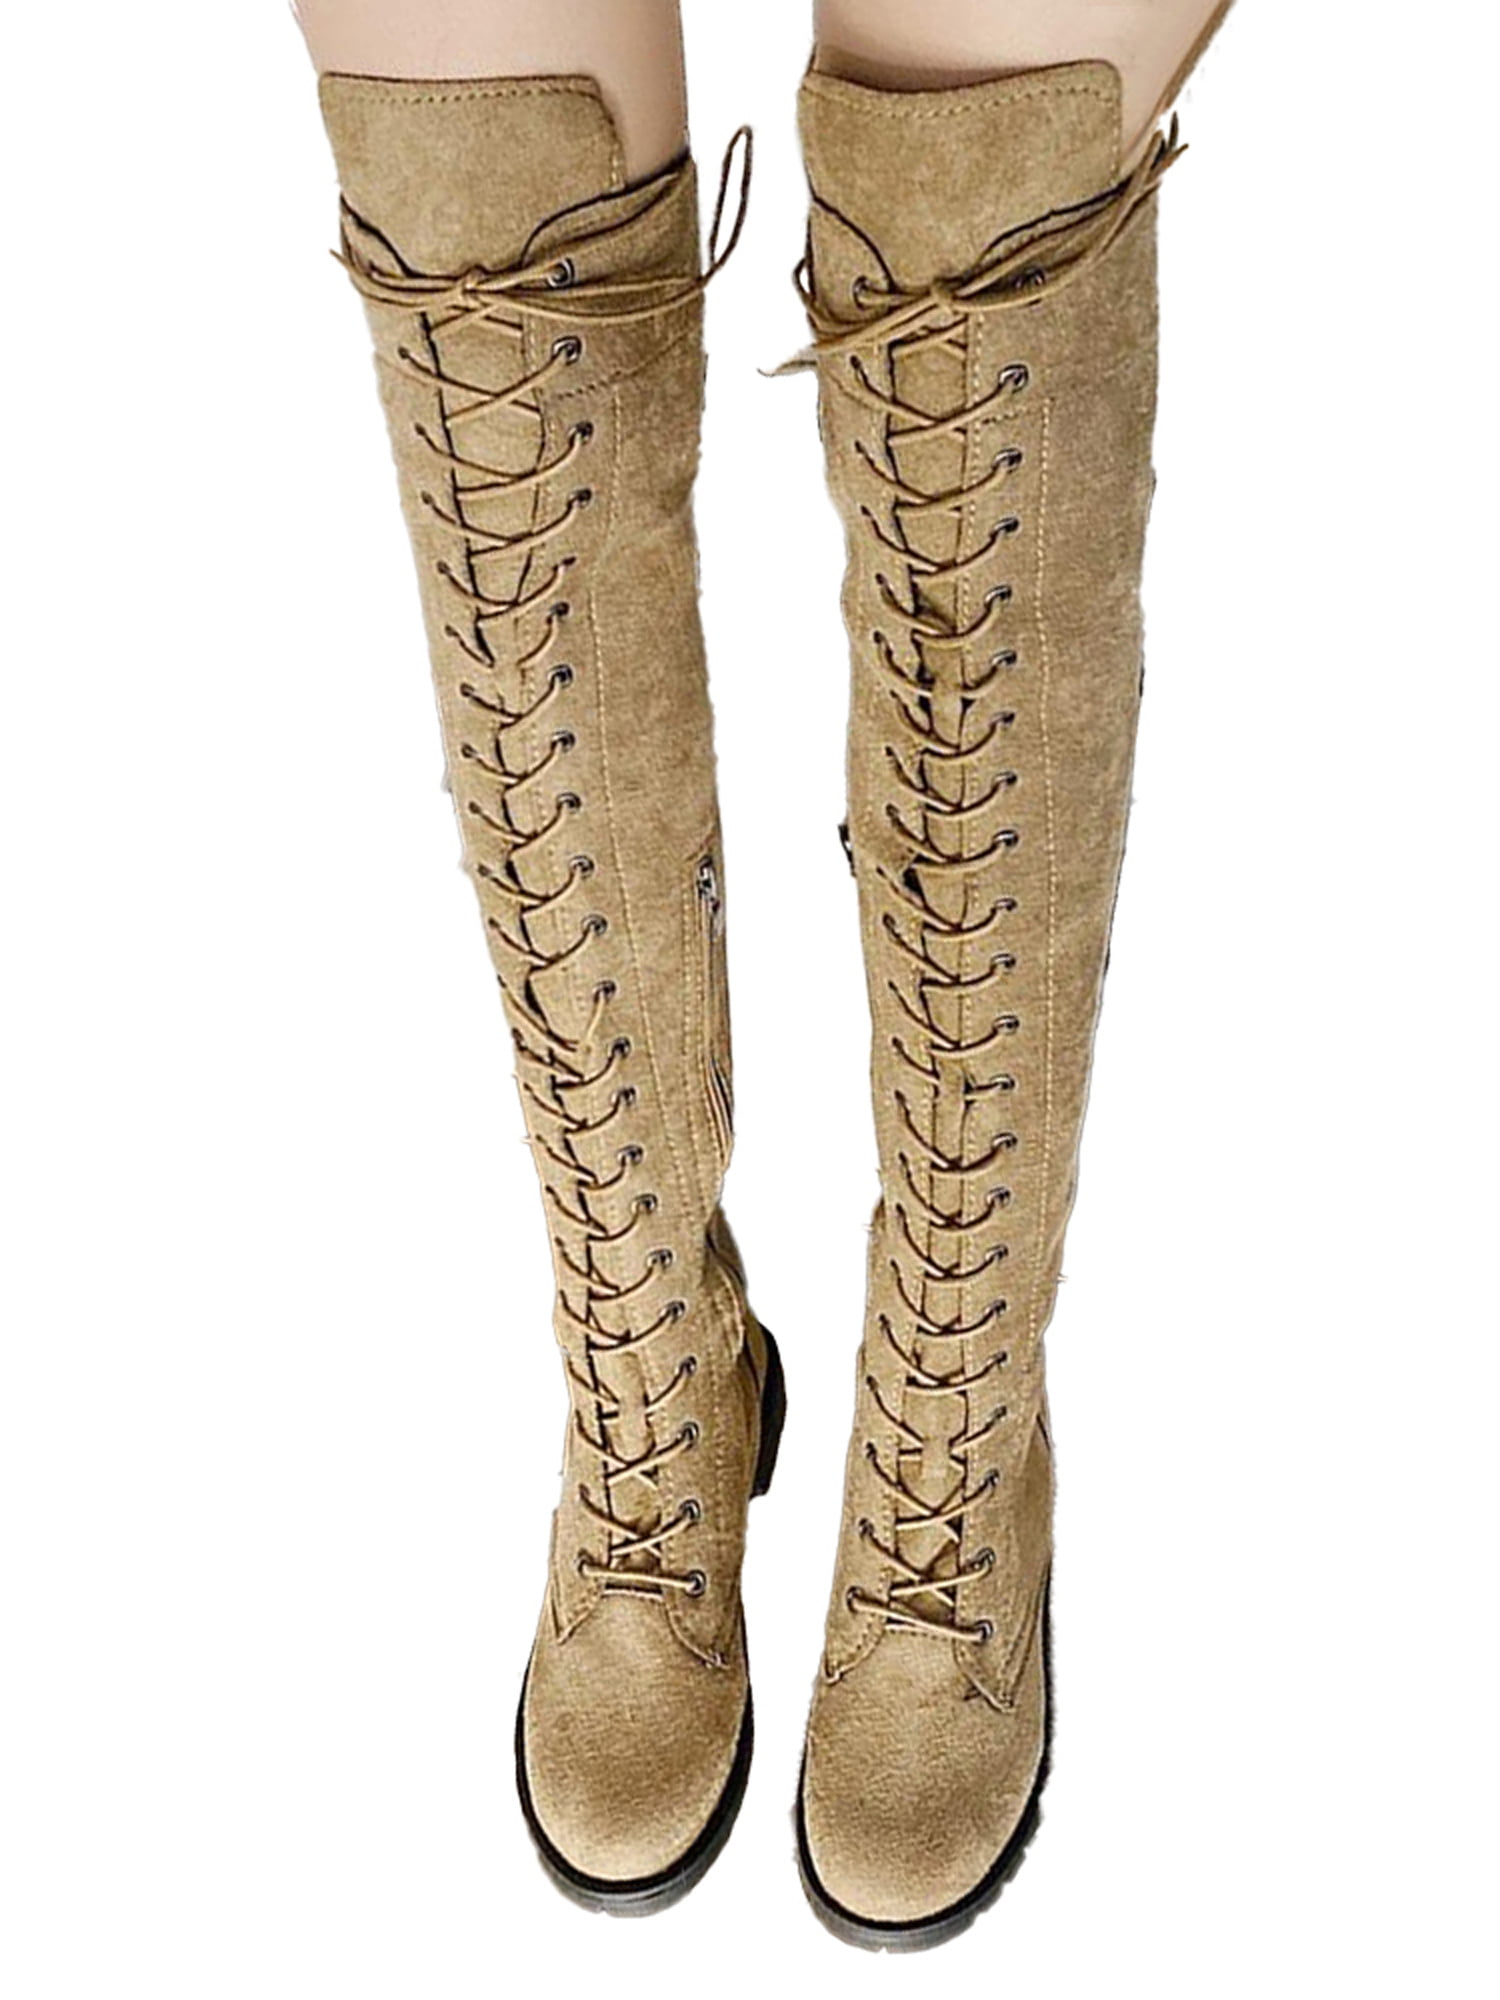 New Womens Military Combat Fashion Boots Lace Up Knee High Low Flat Heel boot 